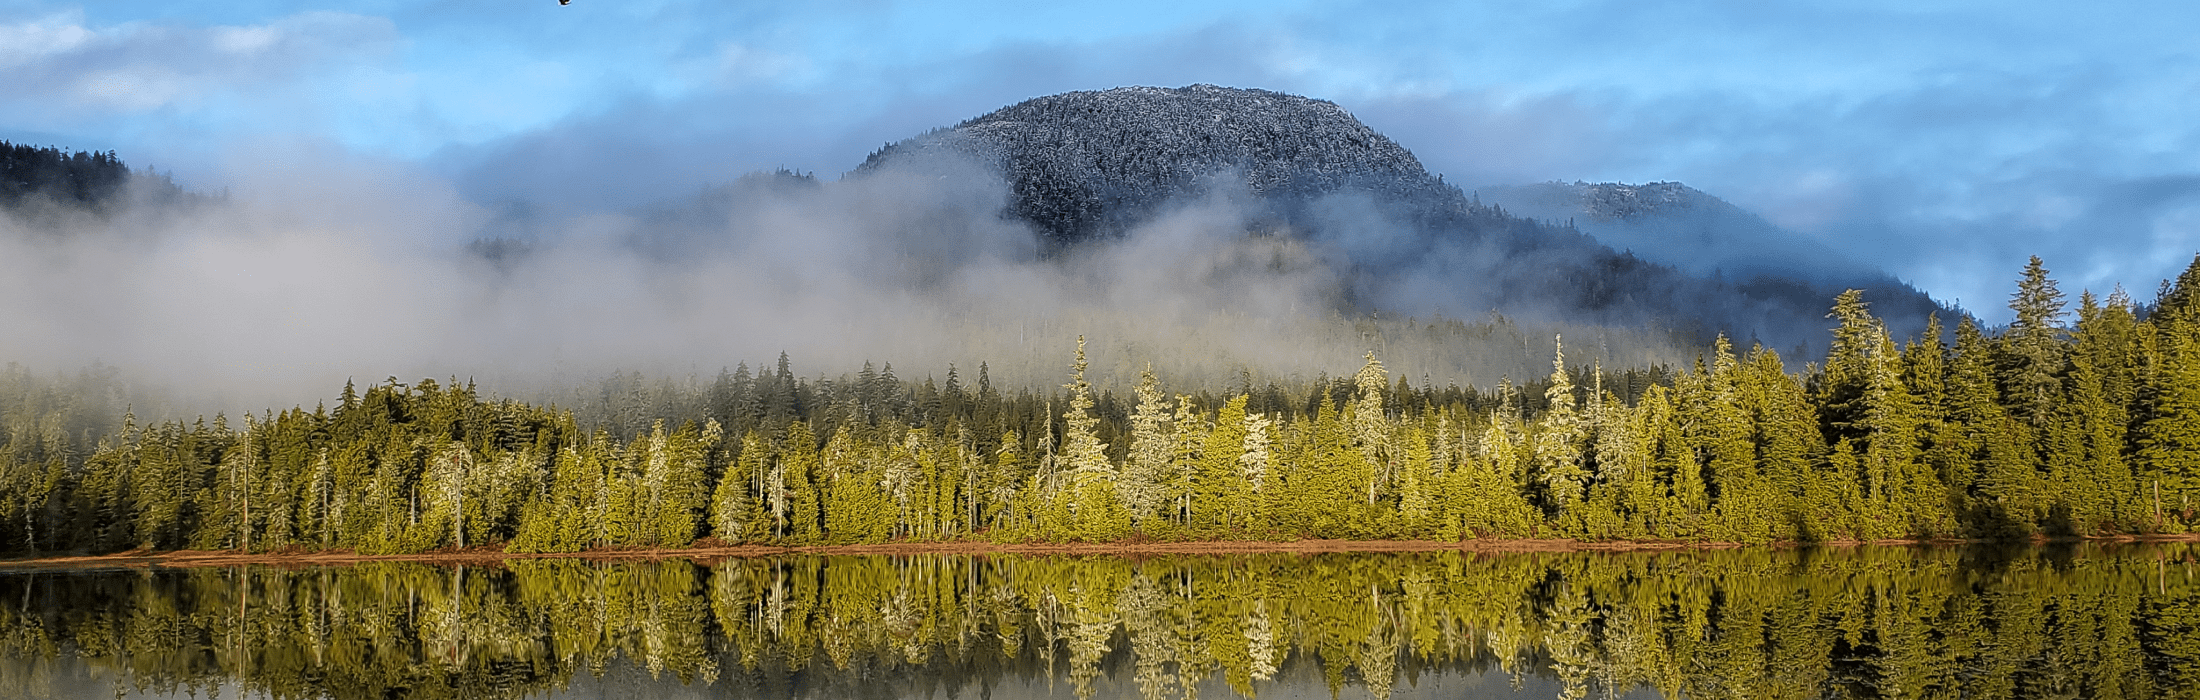 mountain with fog